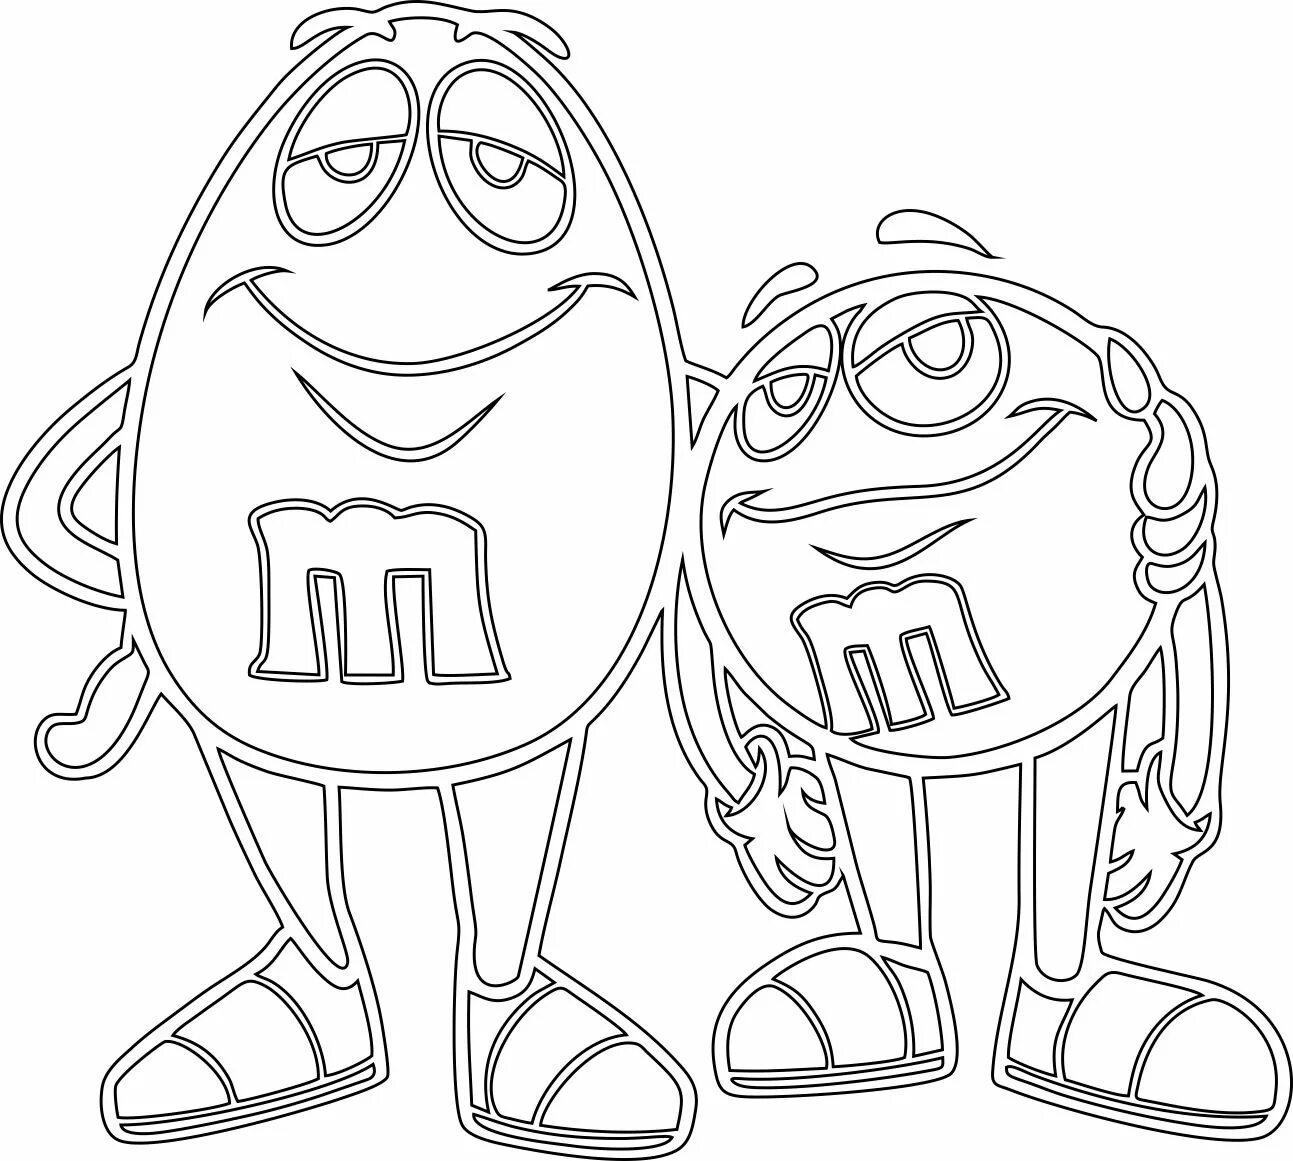 M and ms #2